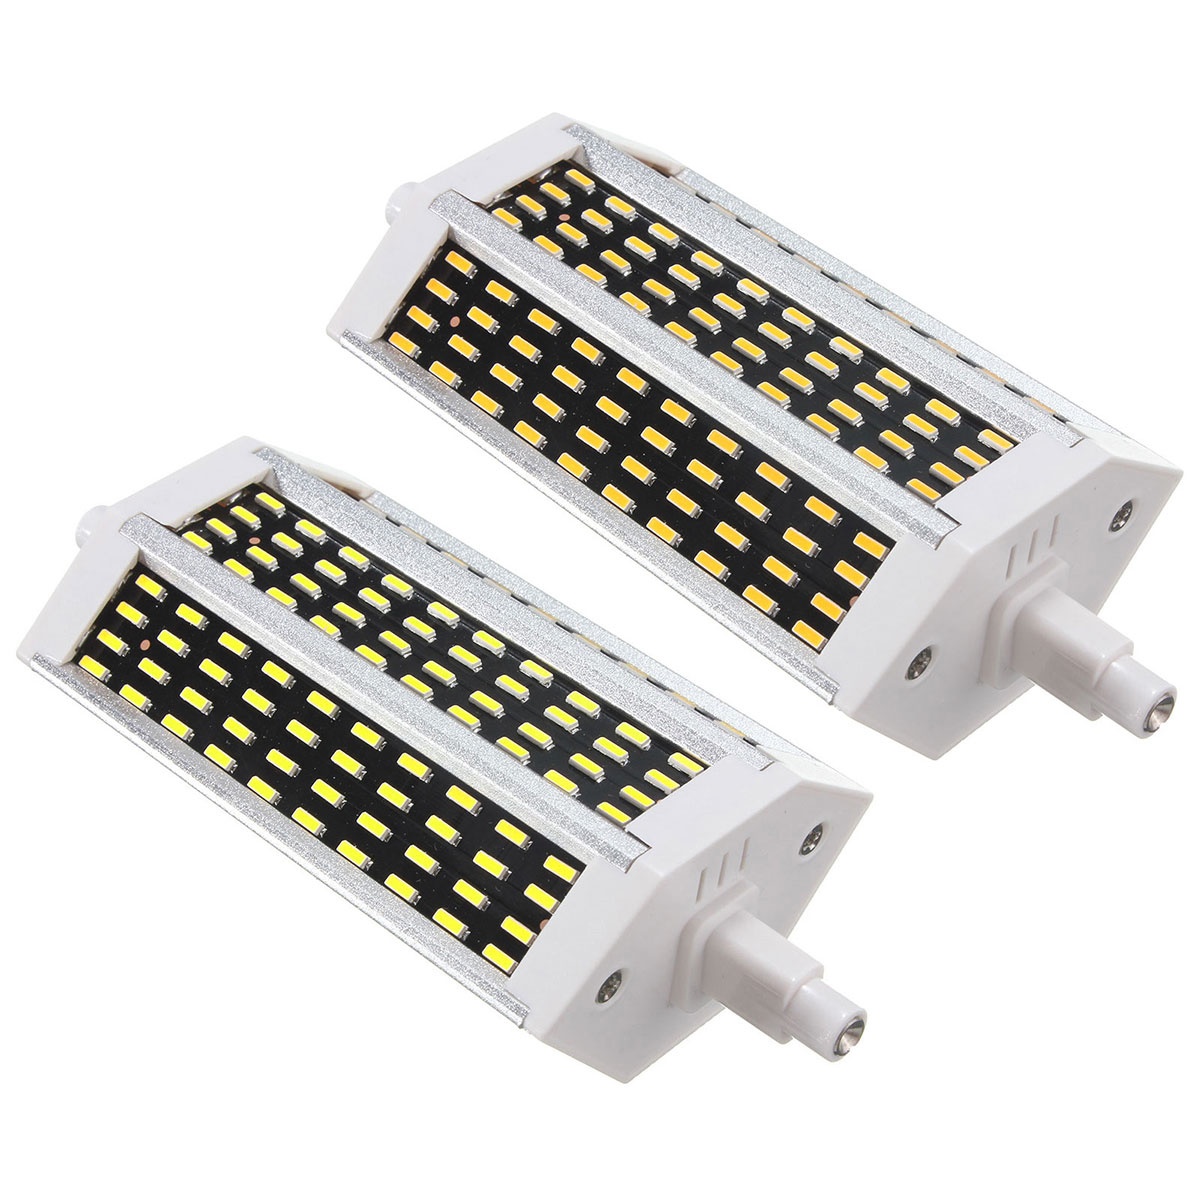 Dimmable-R7S-118mm-15W-120-SMD-4014-LED-Warm-White-Pure-White-Light-Lamp-Bulb-AC220V110V-1059884-5